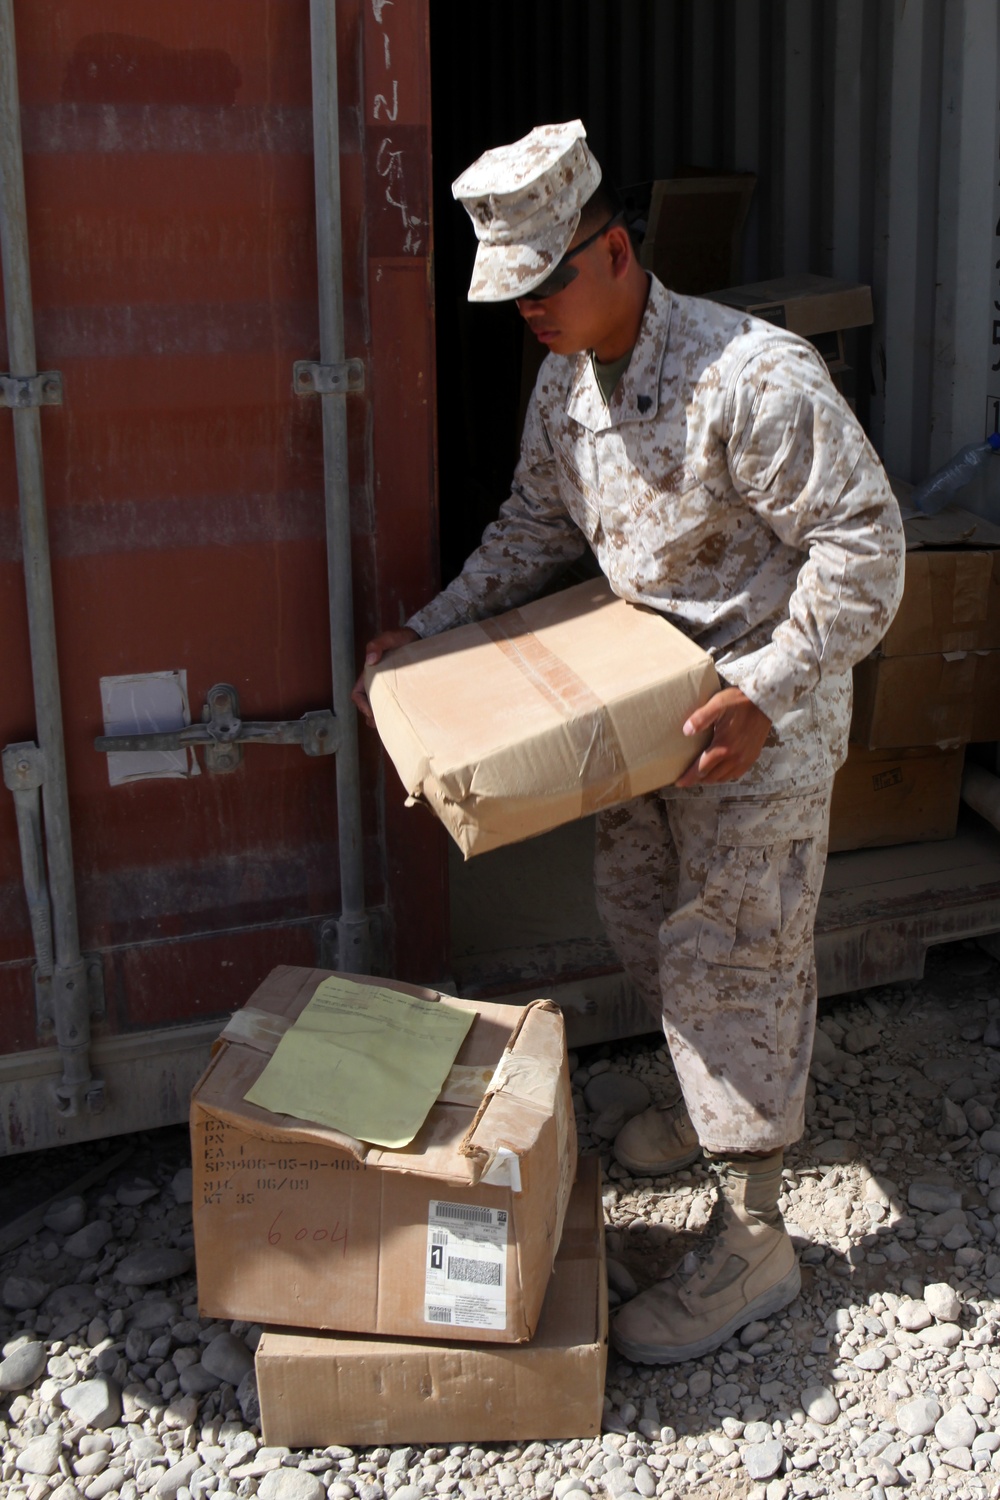 Pick, pack, ship: Marines support units across Helmand Province